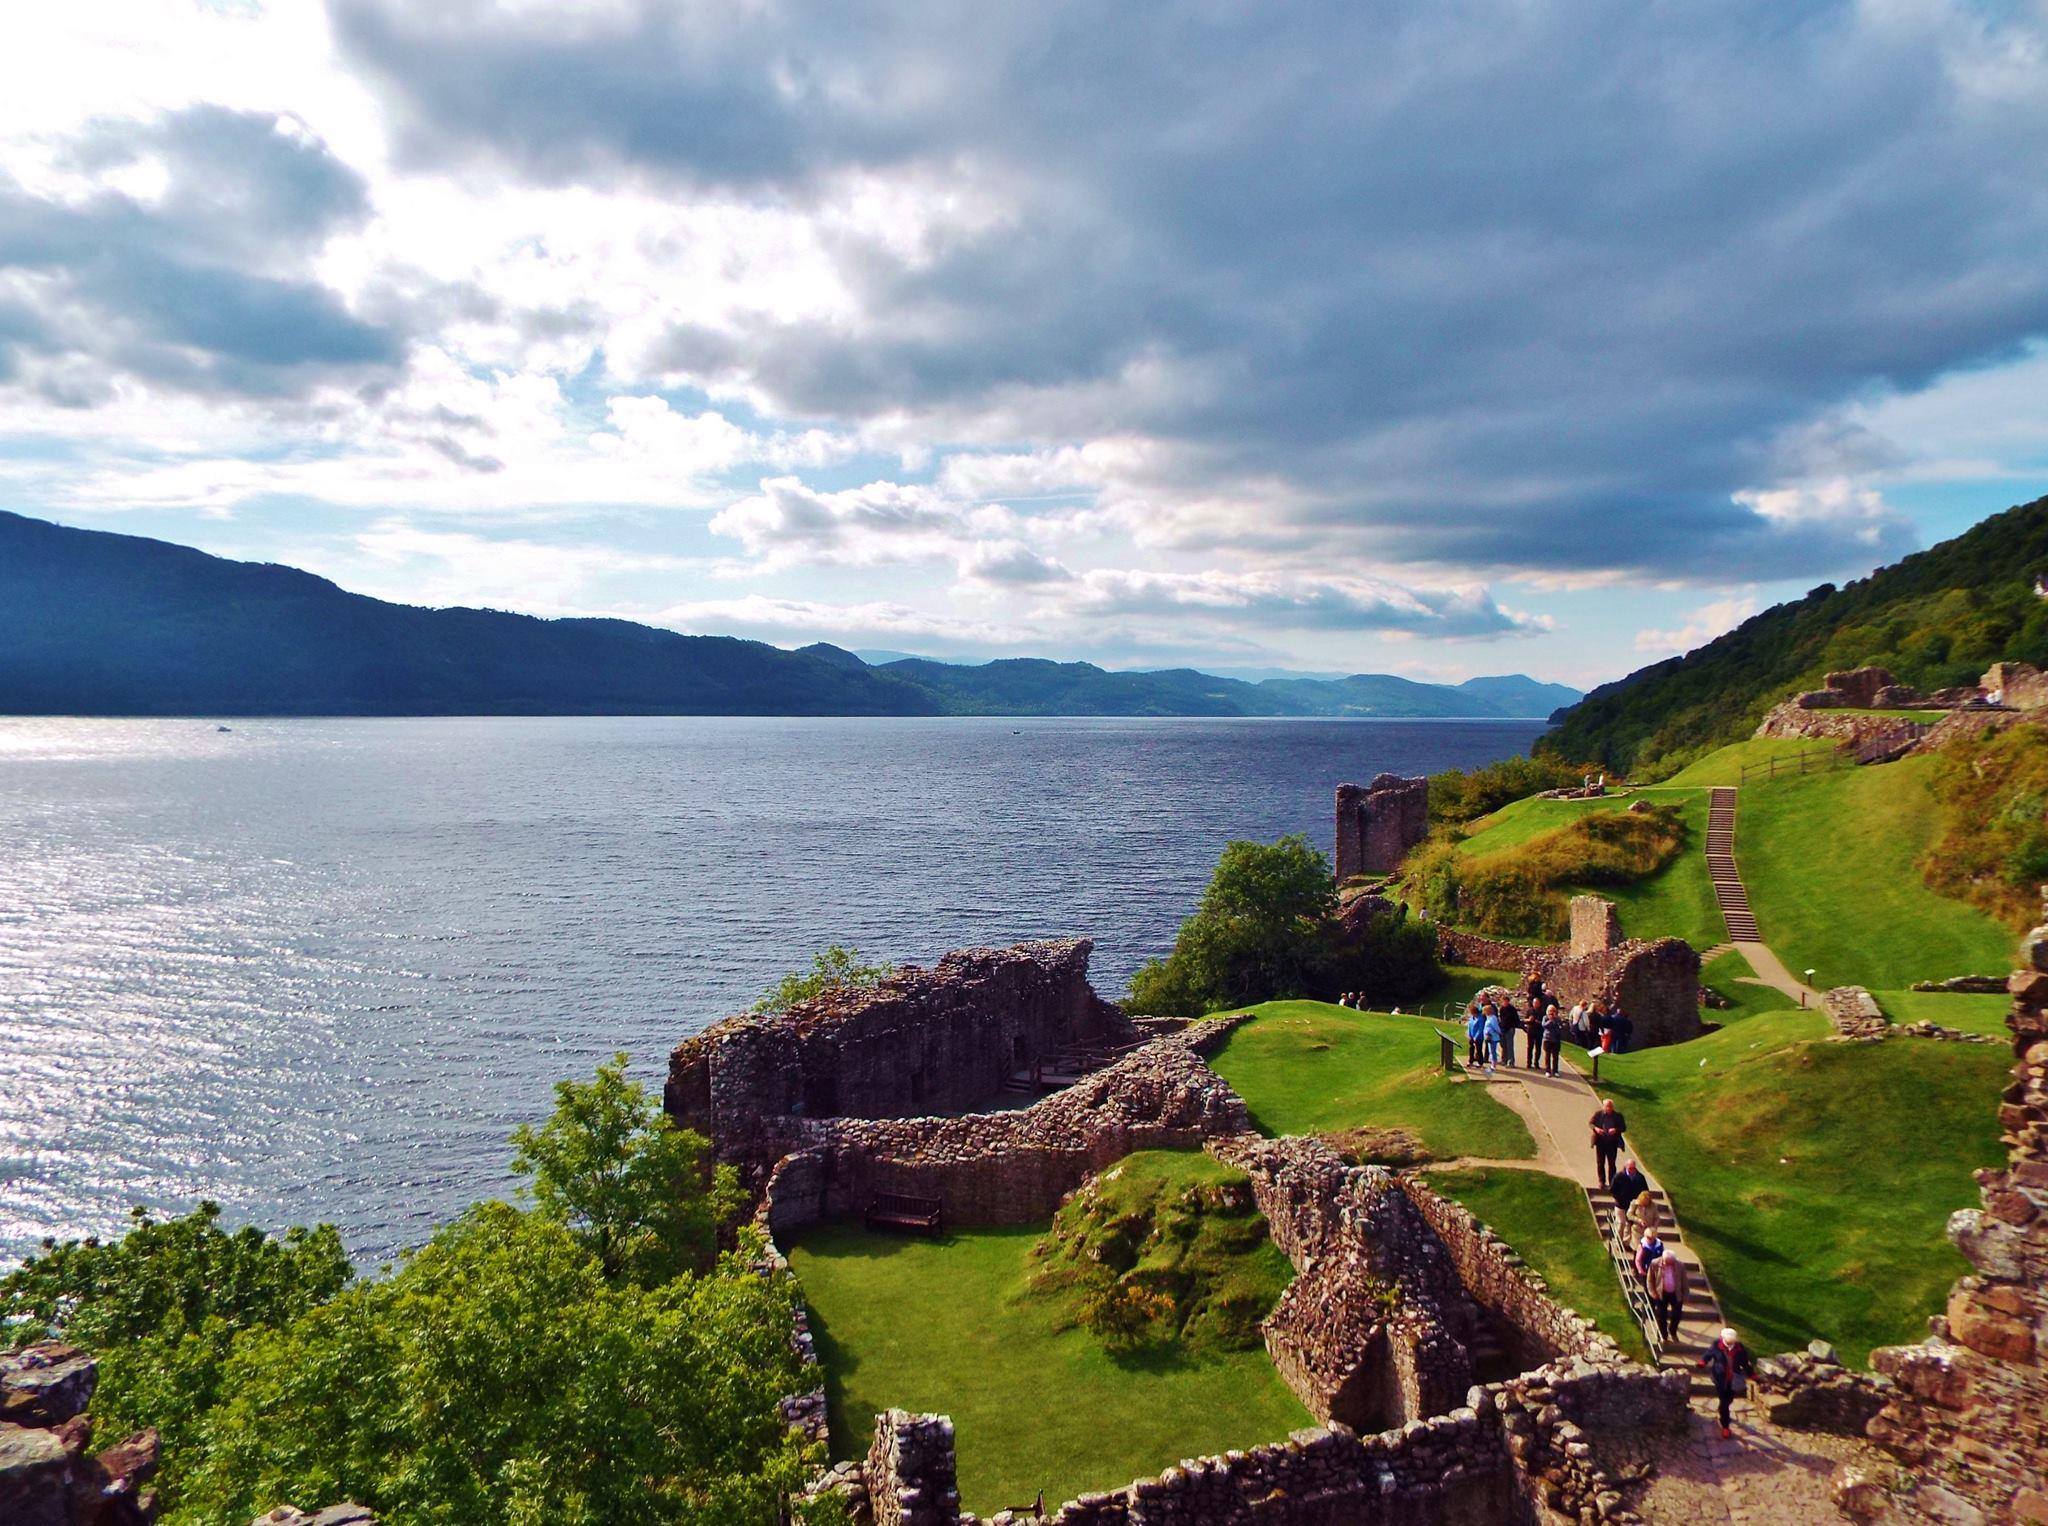 The beautiful Loch Ness in Scotland. Home to Nessie, the freshwater monster